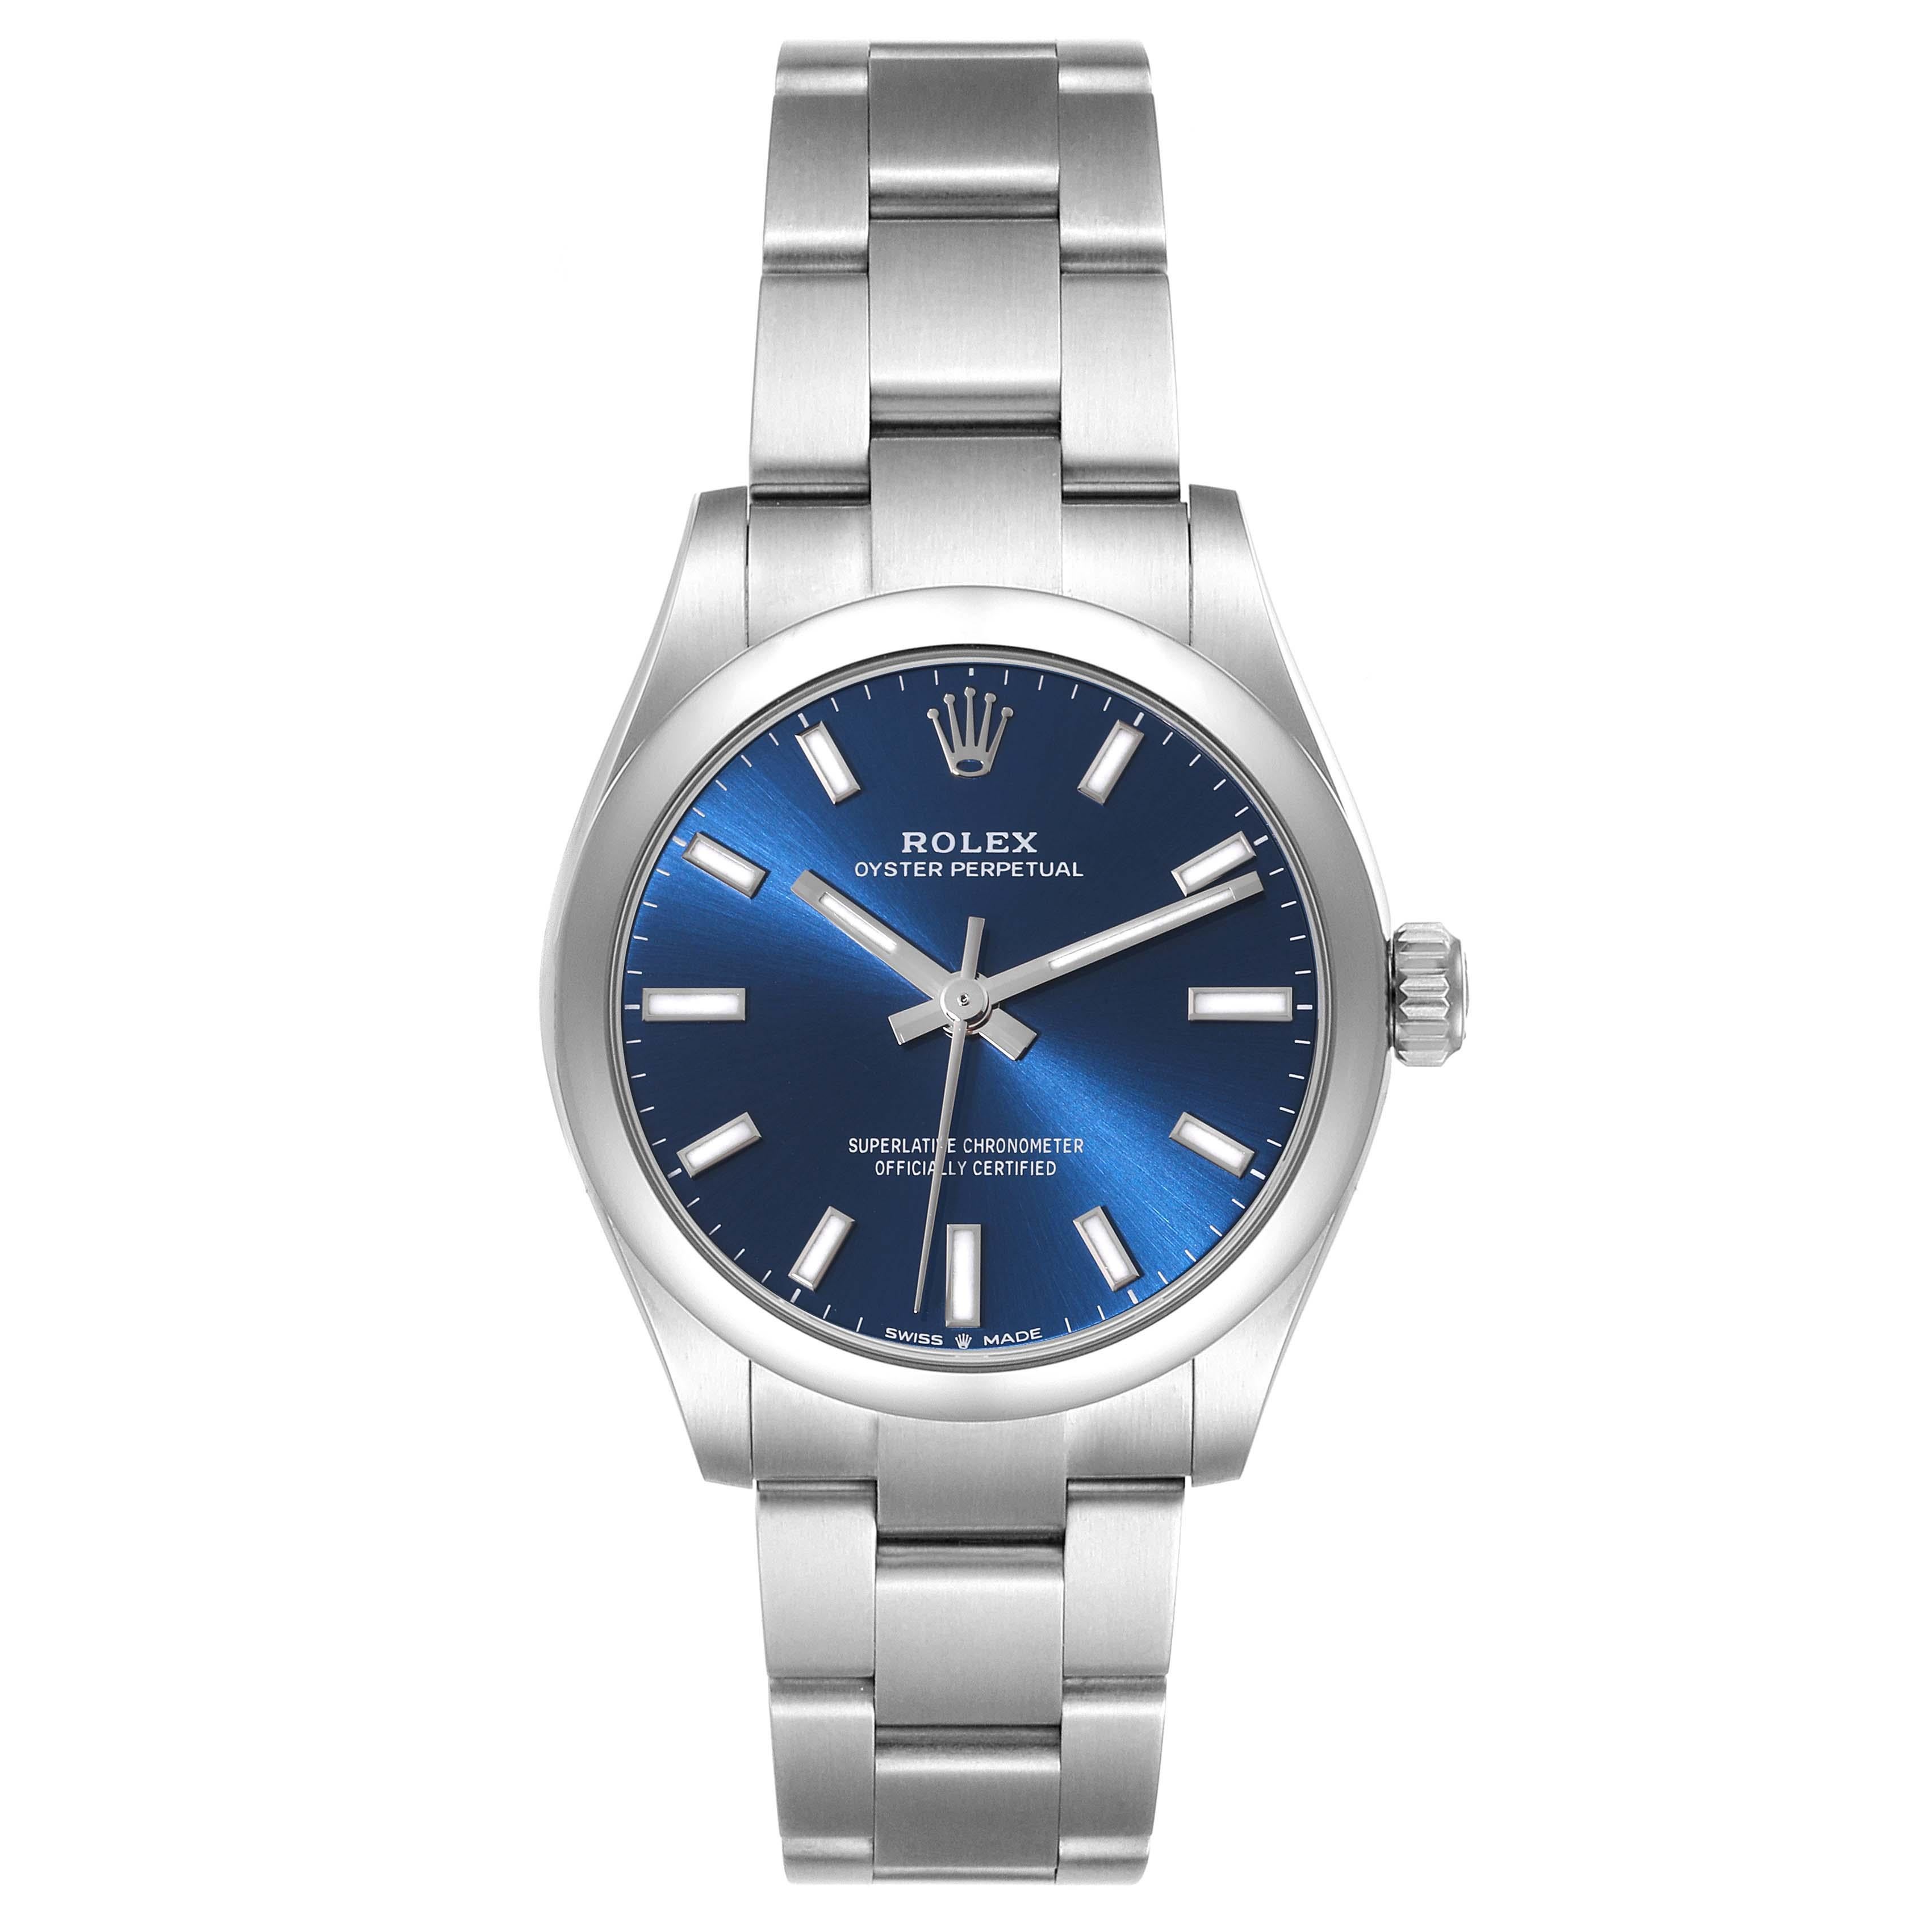 Rolex Oyster Perpetual Midsize 31mm Blue Dial Steel Ladies Watch 277200. Automatic self-winding movement. Stainless steel oyster case 31.0 mm in diameter. Rolex logo on a crown. Stainless steel smooth bezel. Scratch resistant sapphire crystal. Blue